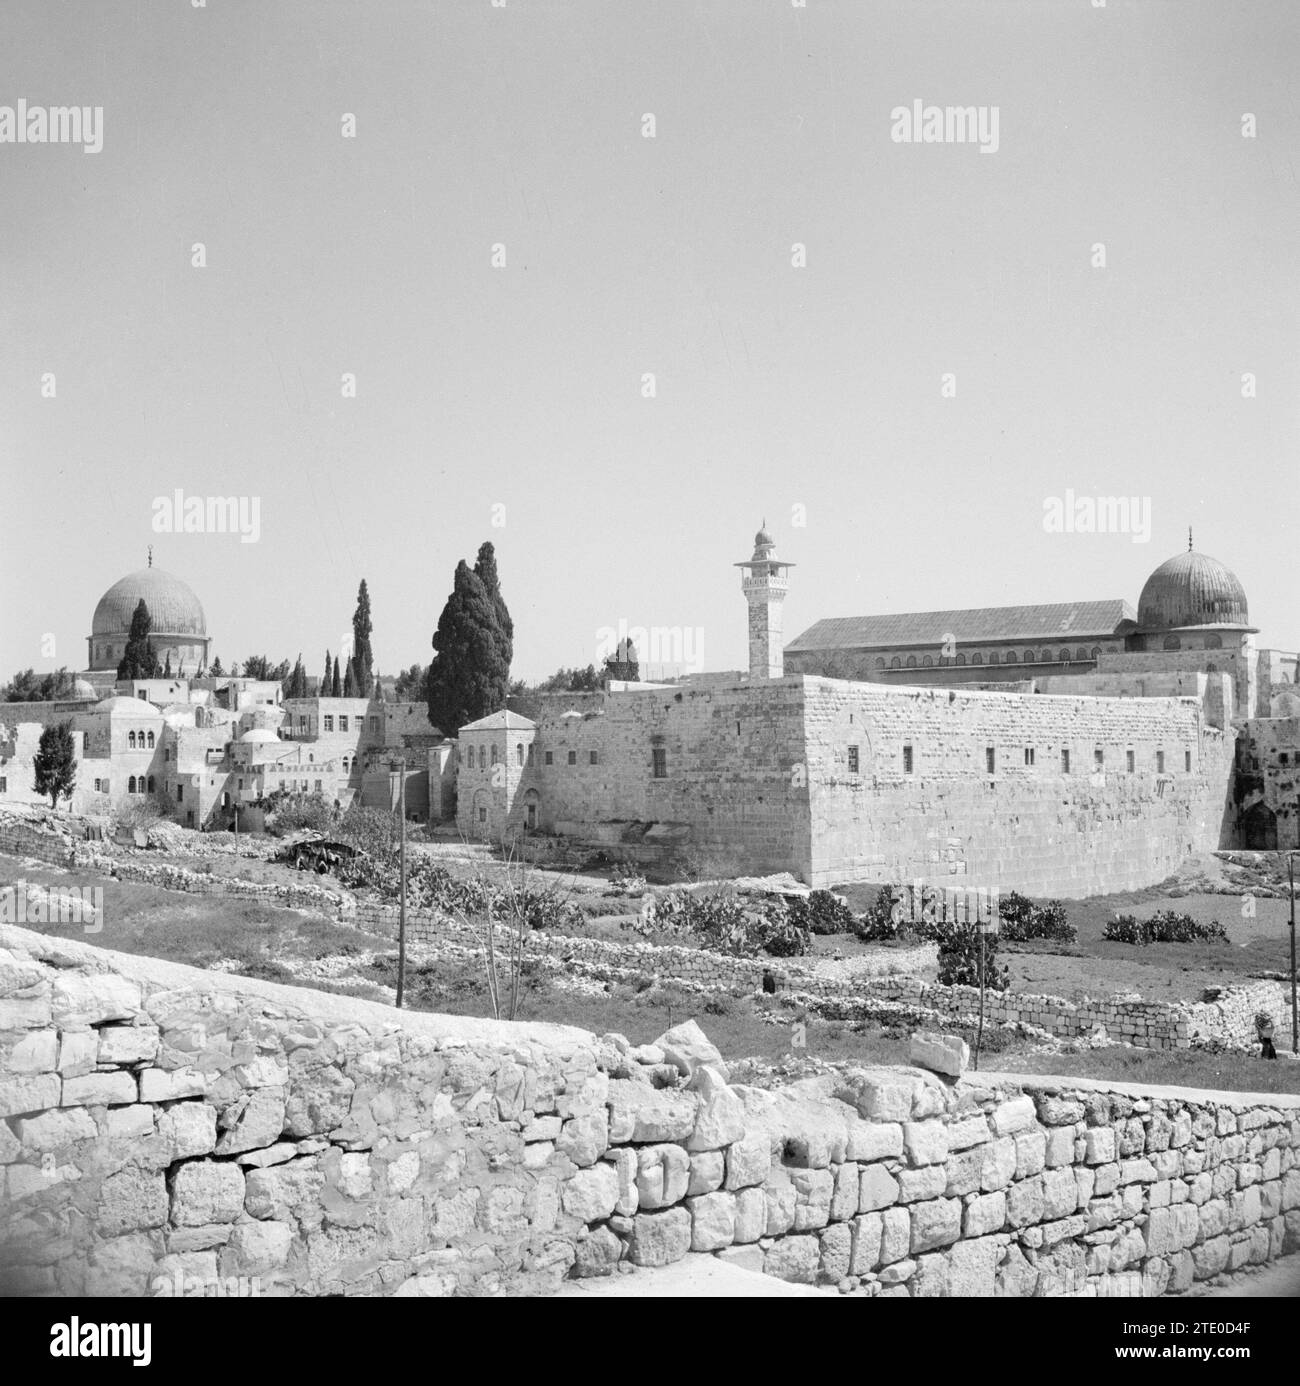 In Jewish Quarter. Al Aqsa mosque in the distance. Temple Square in the foreground ca. 1950-1955 Stock Photo